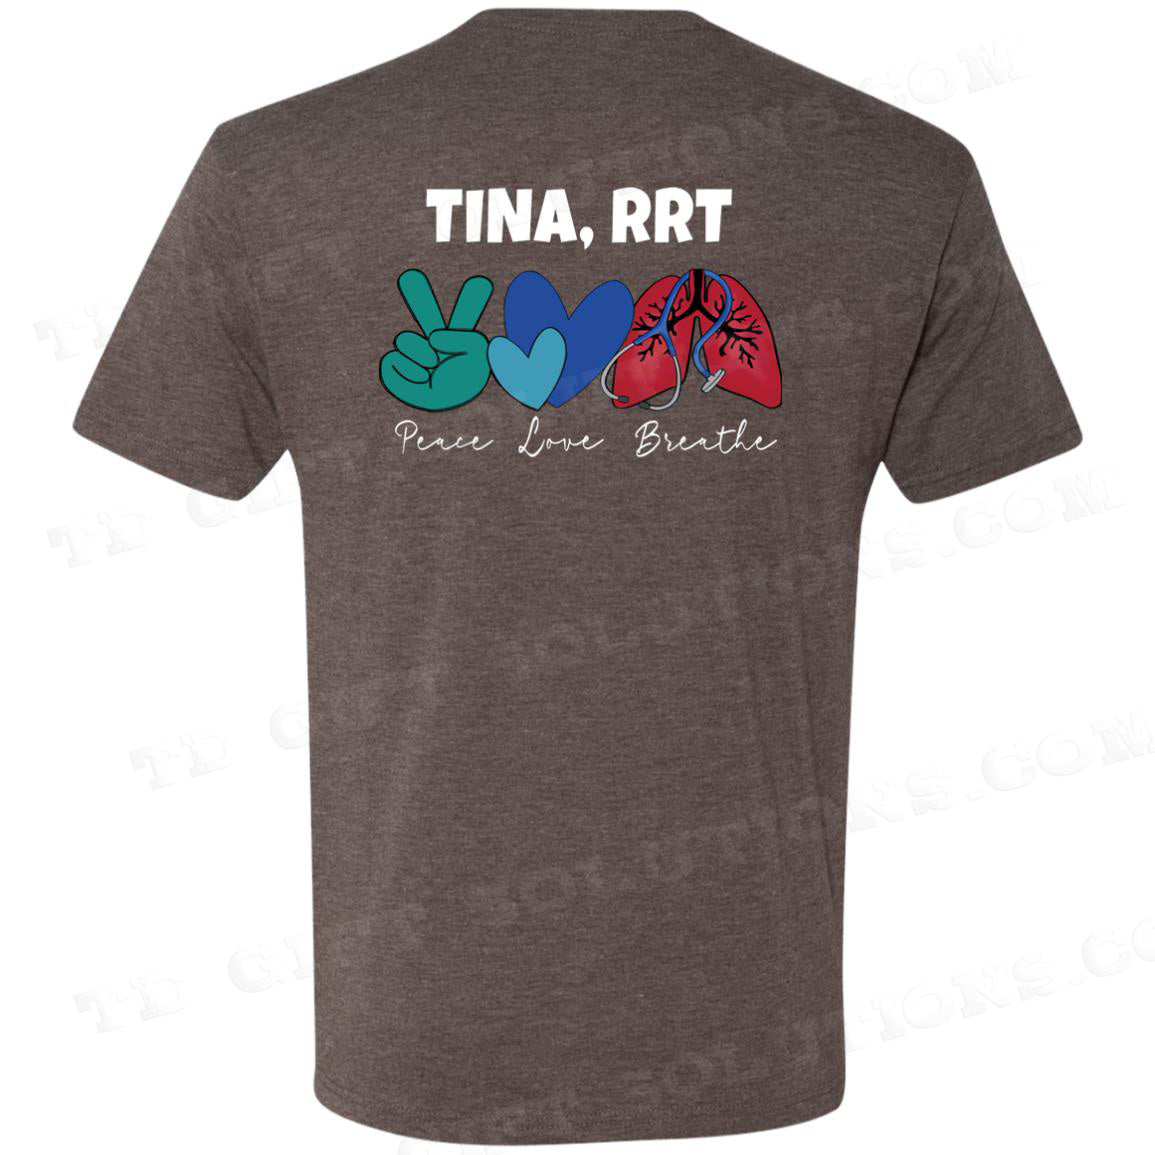 Personalized Respiratory Care Week Triblend T-Shirt-TD Gift Solutions.com